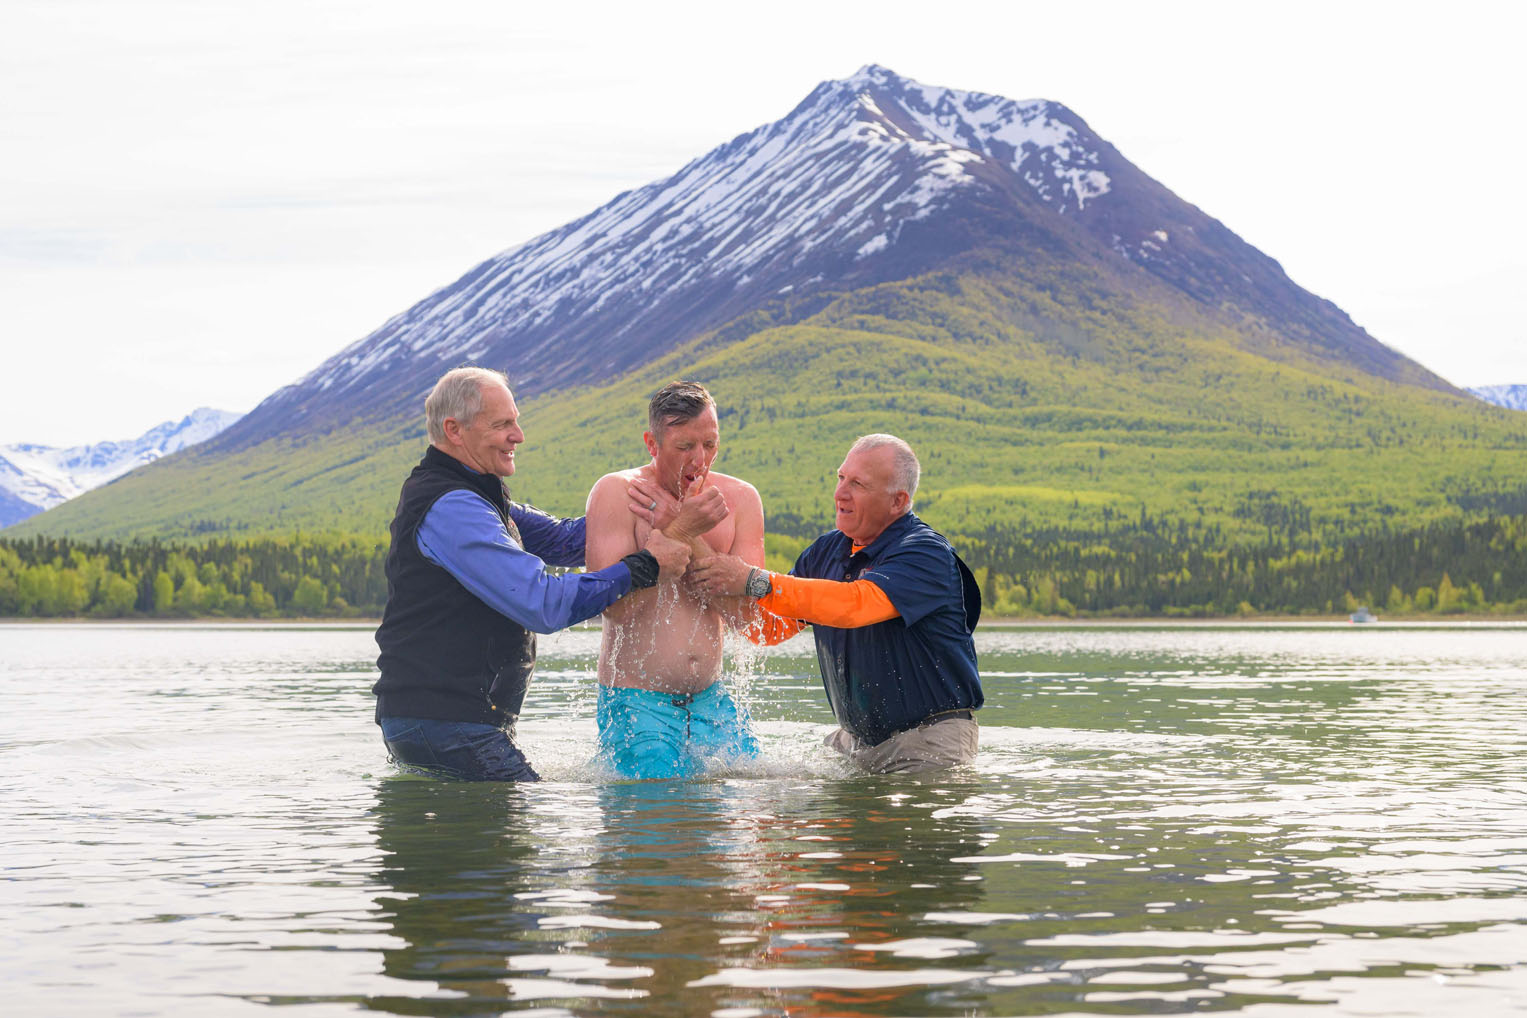 Chad gave his life to Jesus Christ and was baptized in the chilly glacier-fed waters of Lake Clark.